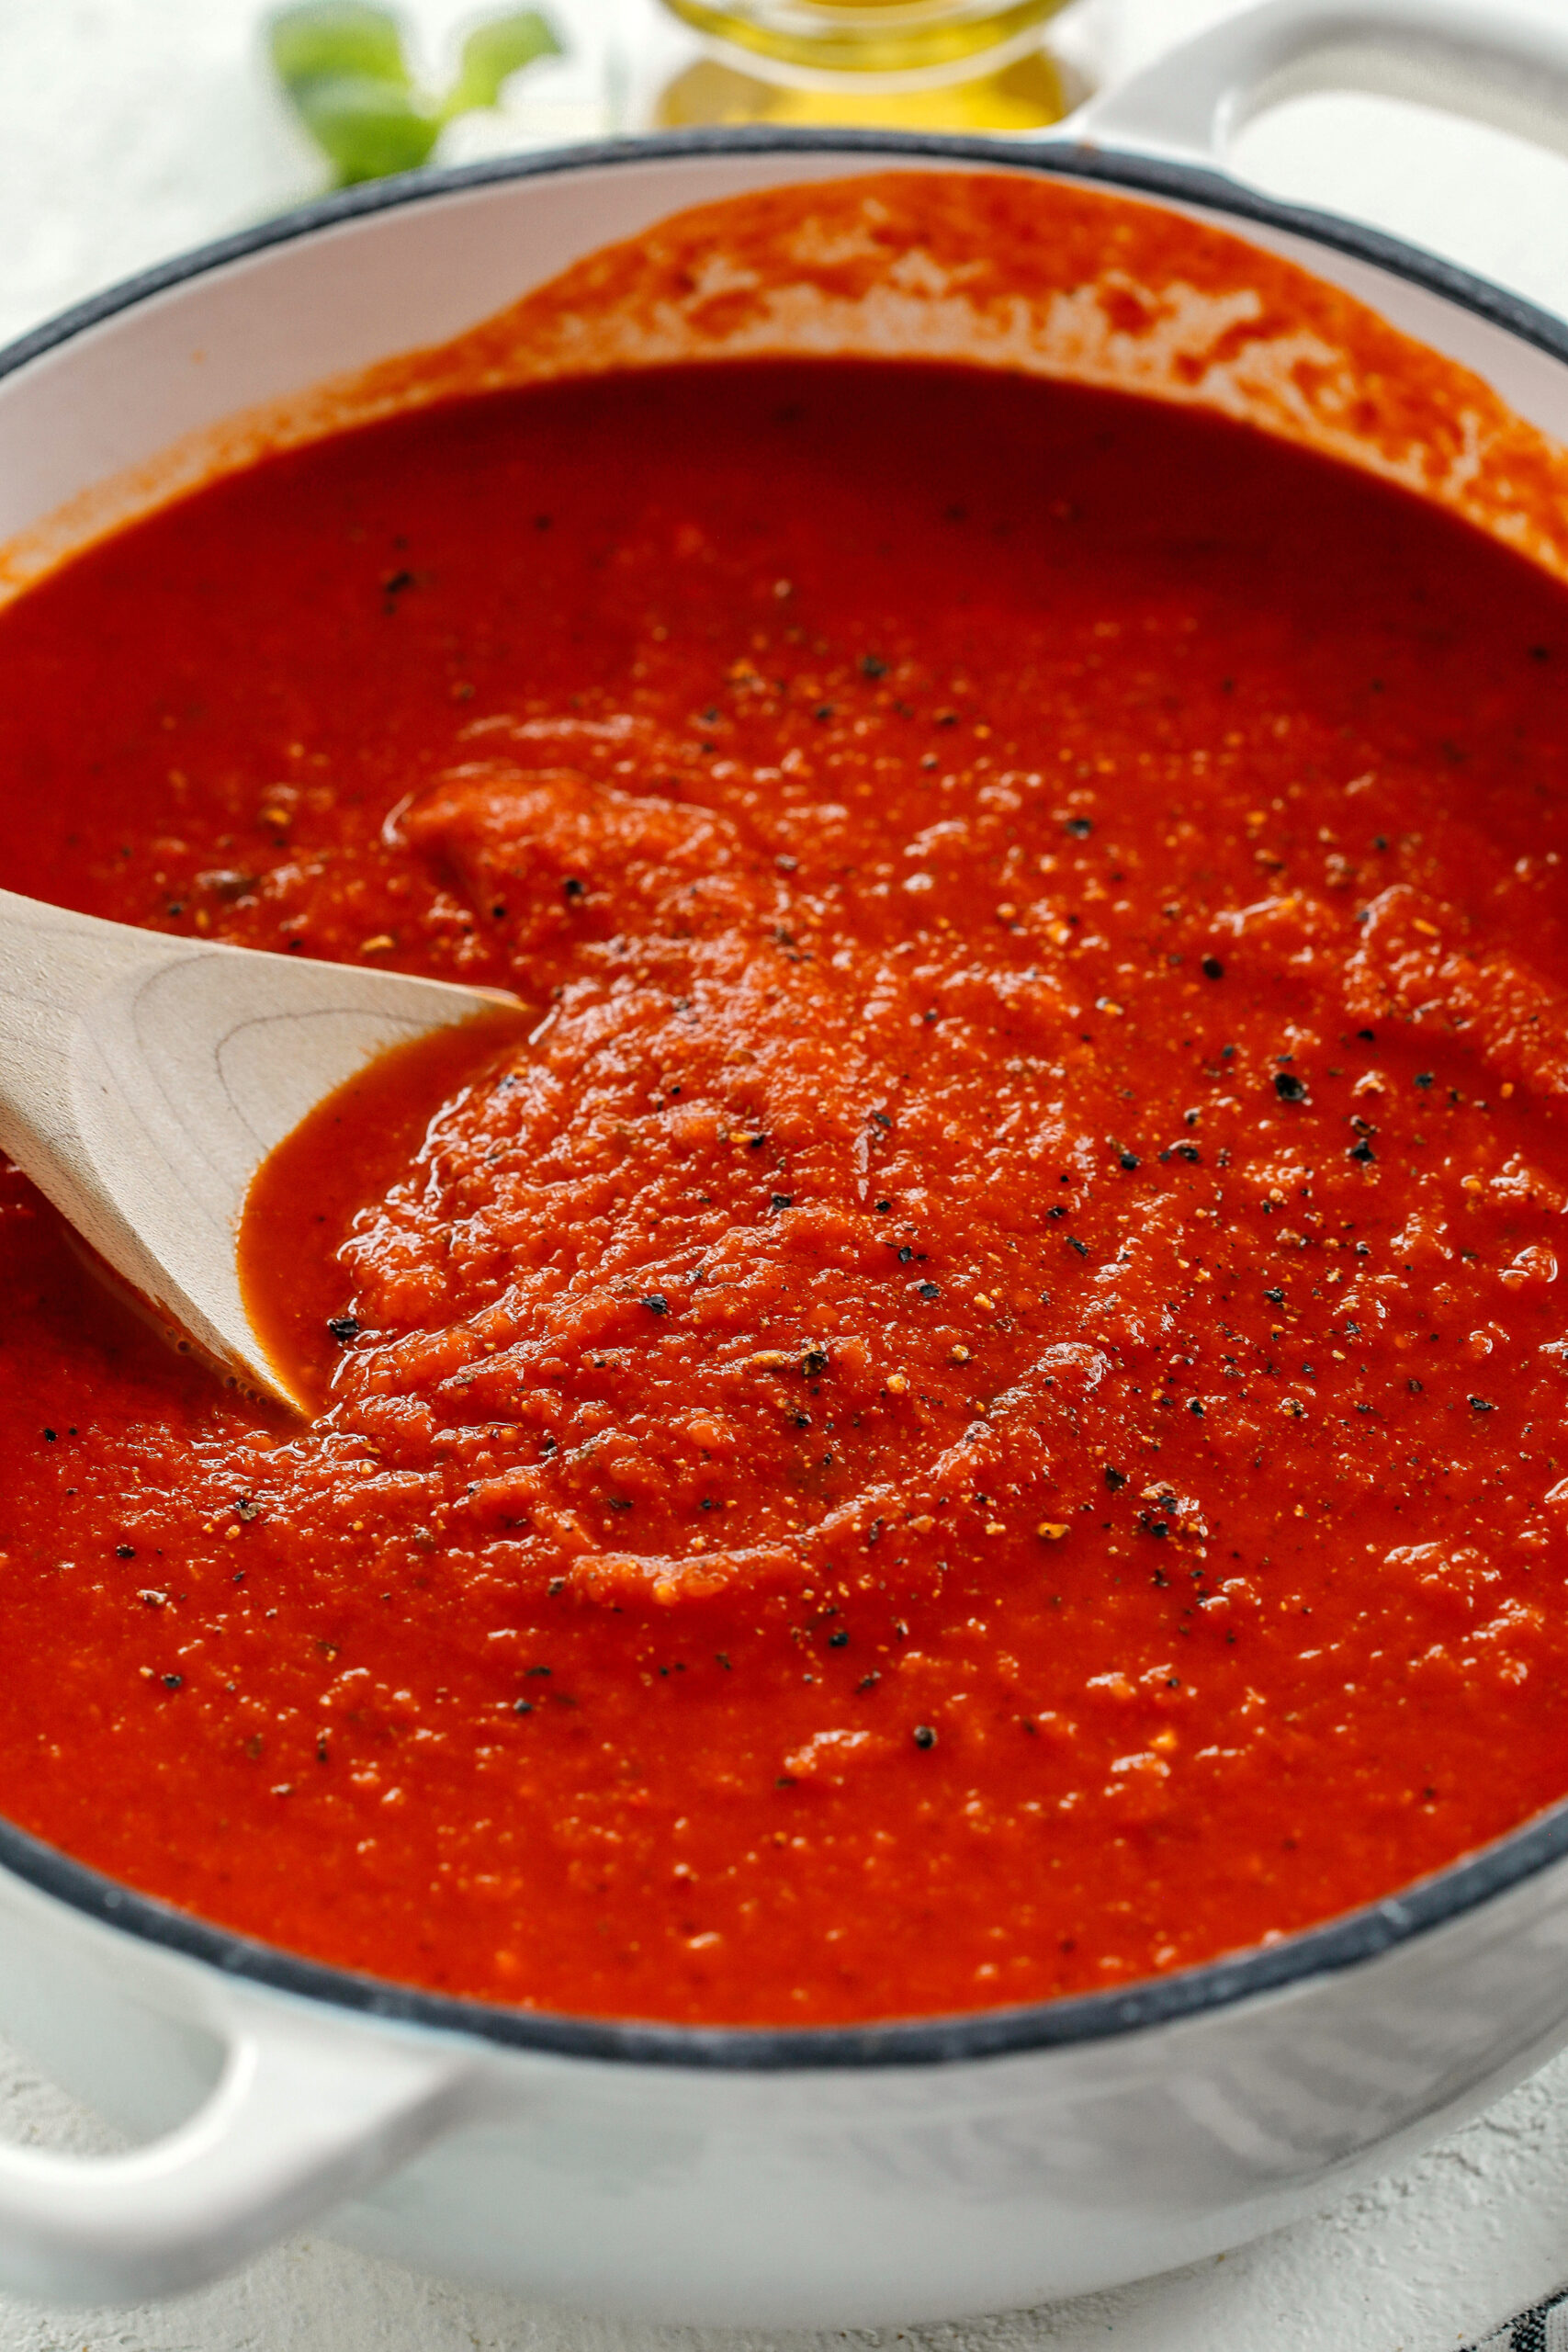 This Loaded Veggie Tomato Sauce is packed with zucchini, carrots, bell peppers, celery and onions all simmered and blended together for the most delicious marinara that can be used with pasta, meatballs, on top of pizza, as a dipping sauce and so much more!